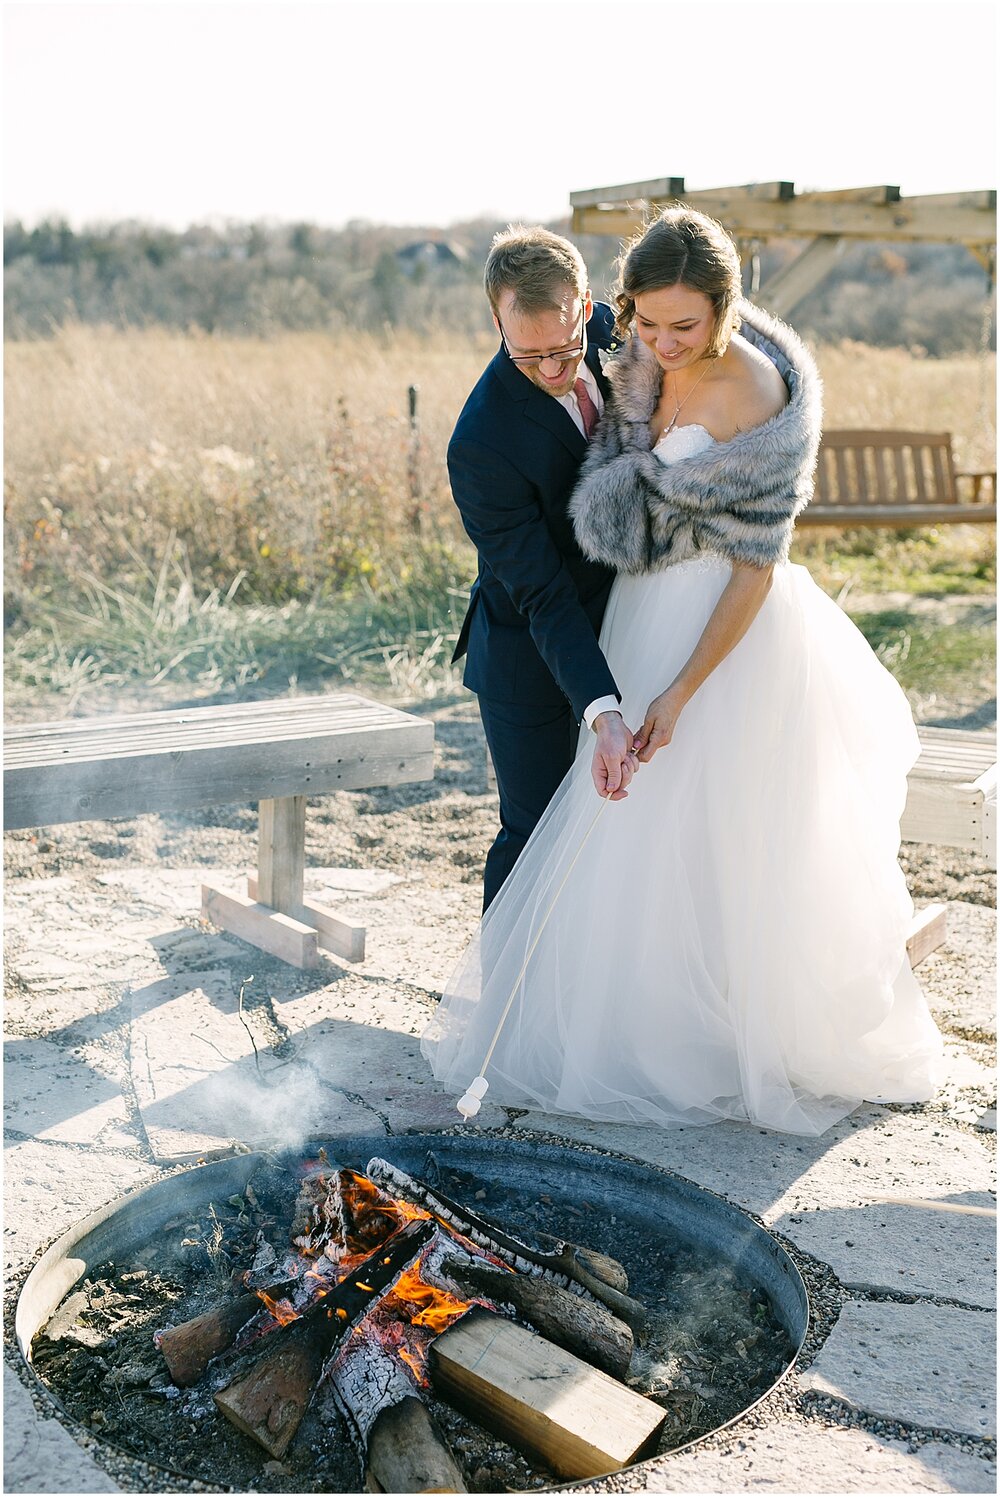  bride and groom having marshmellows by the firepit 